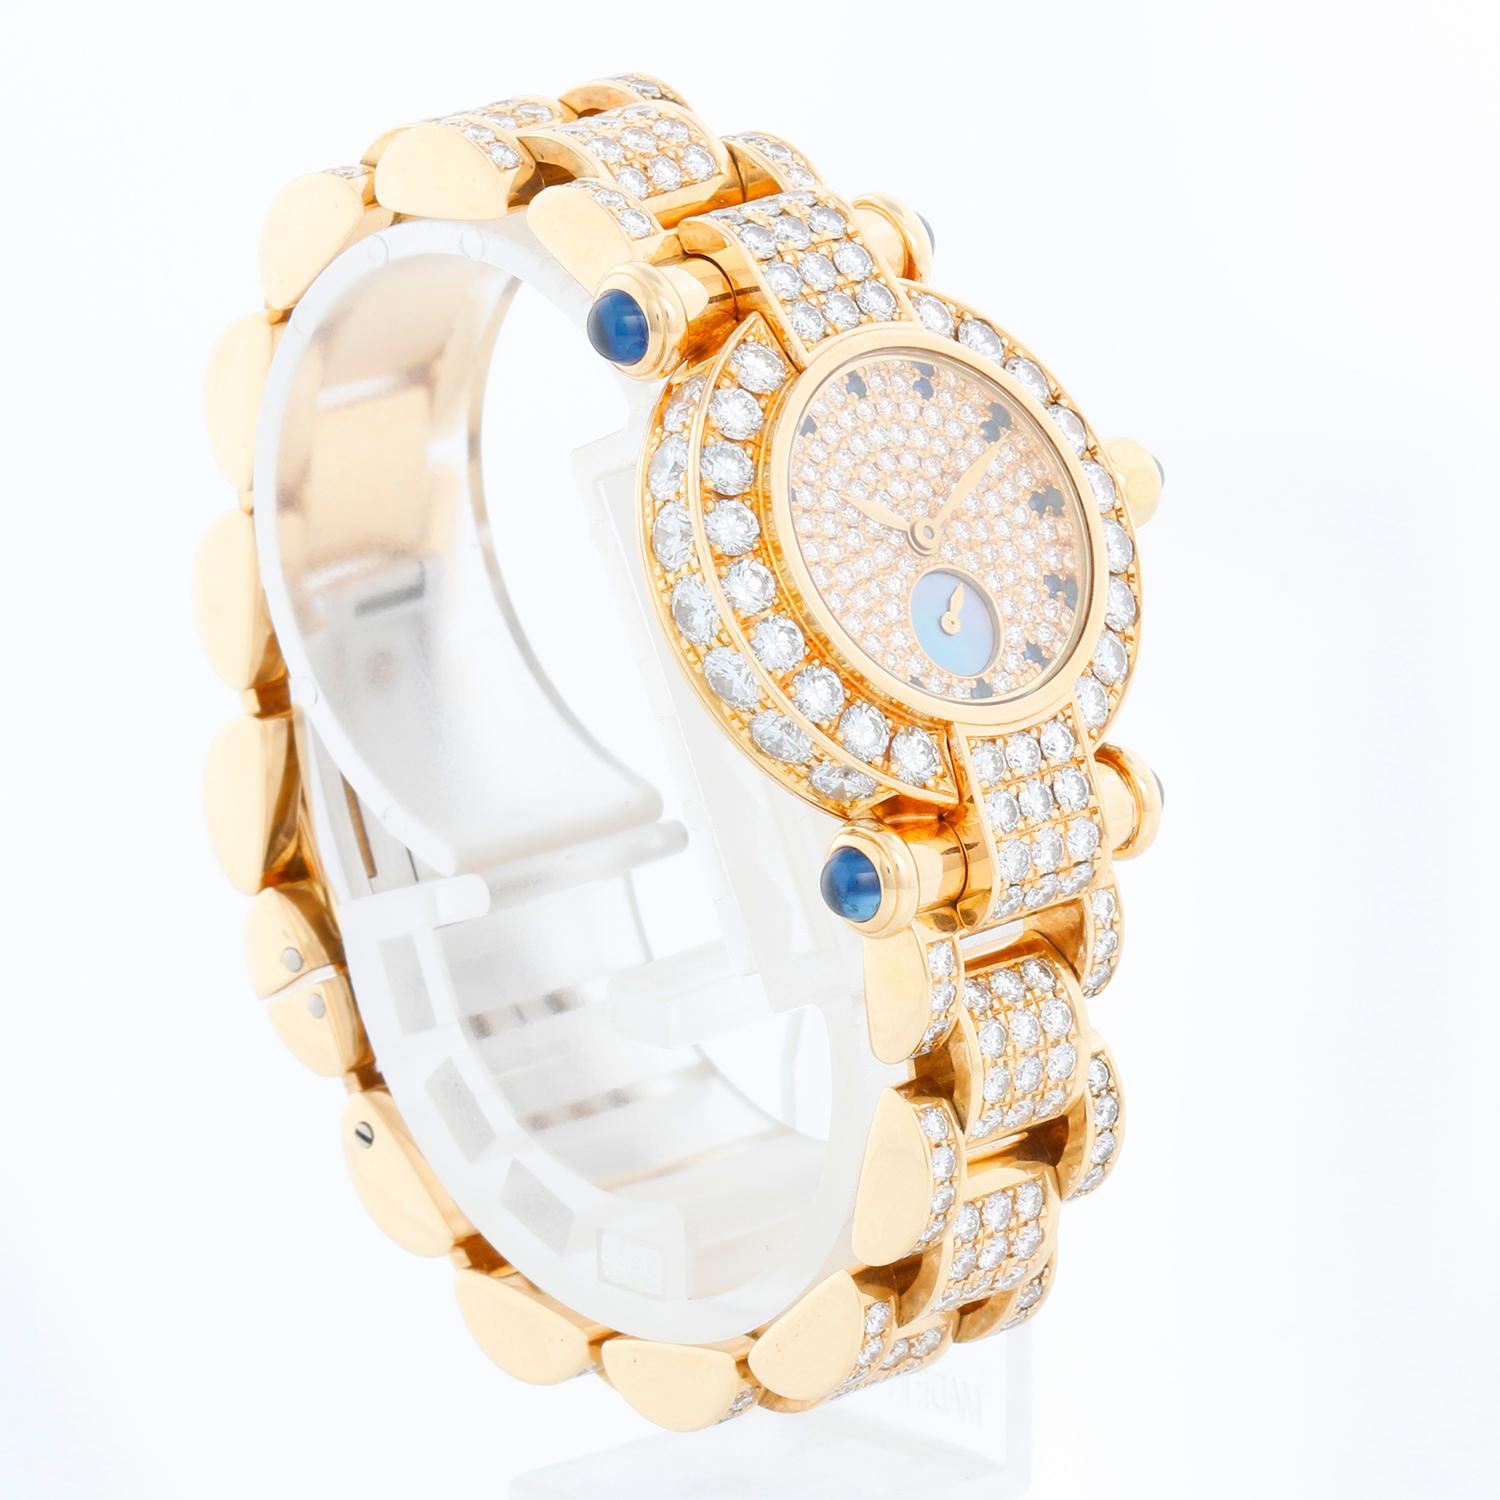 Chopard Imperiale 18k Yellow Gold Ladies Watch 39/3368-23 In Excellent Condition For Sale In Dallas, TX